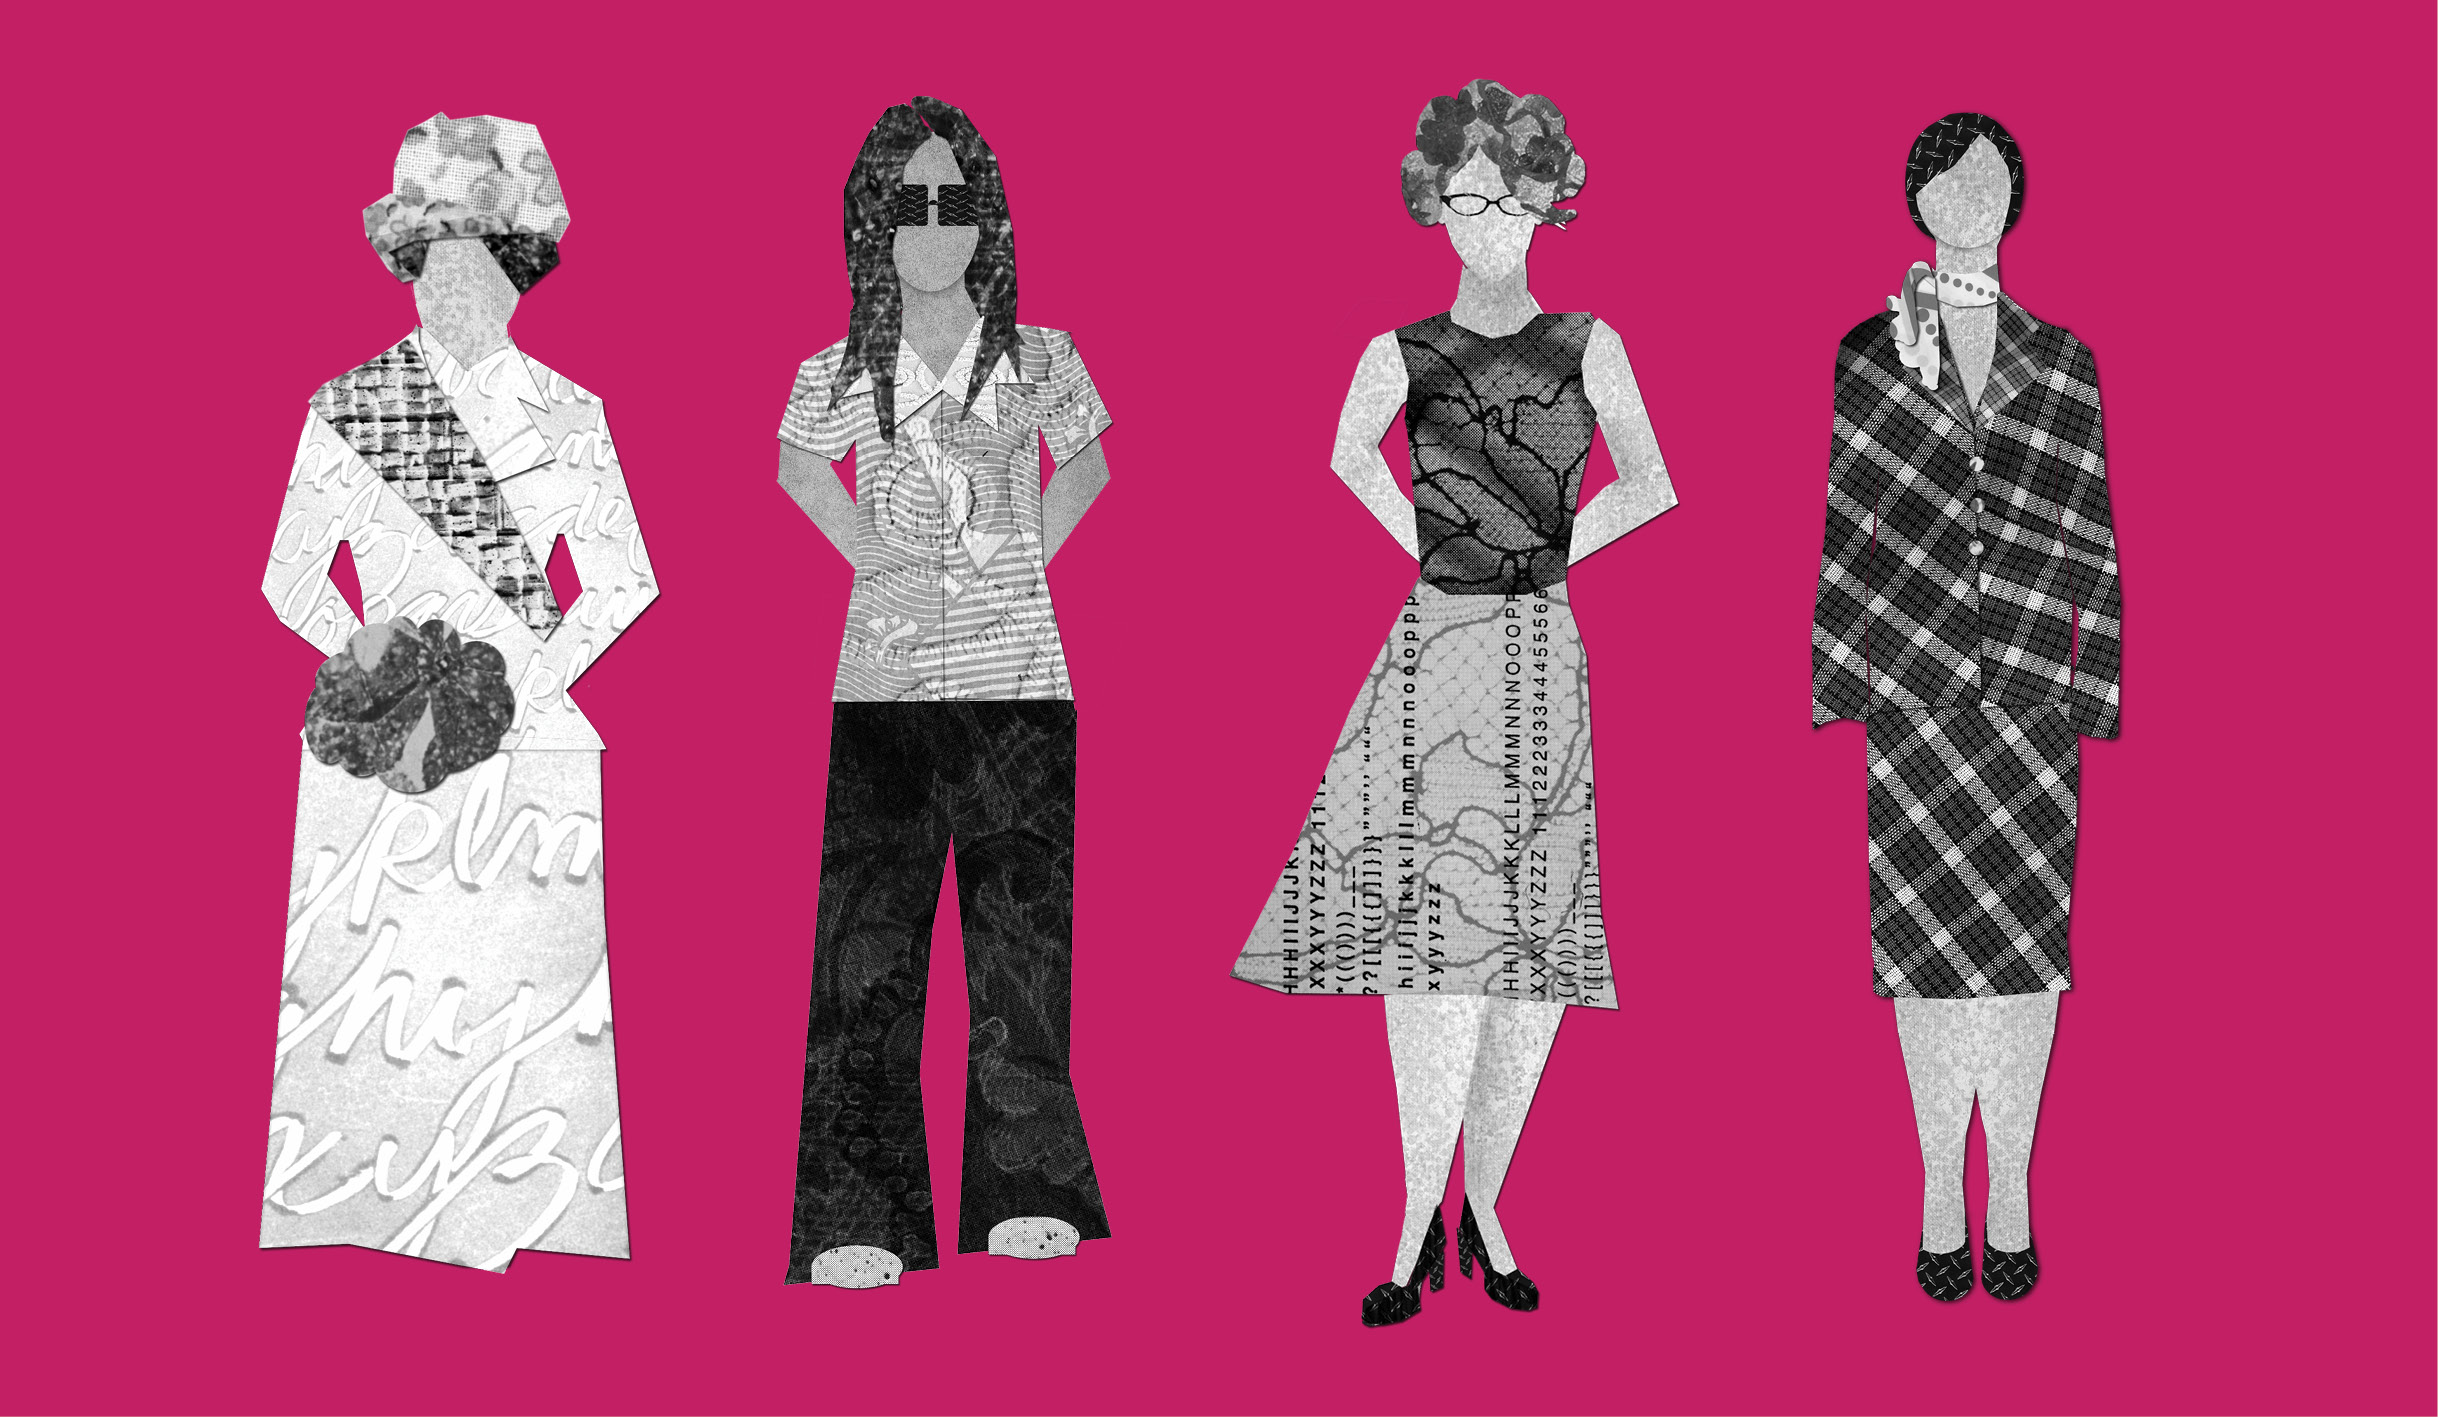 Collaged illustrations of four women representing the different waves of feminism: a suffragette from the 20s, a hippie looking woman from the 70s, and two professionally dressed women.